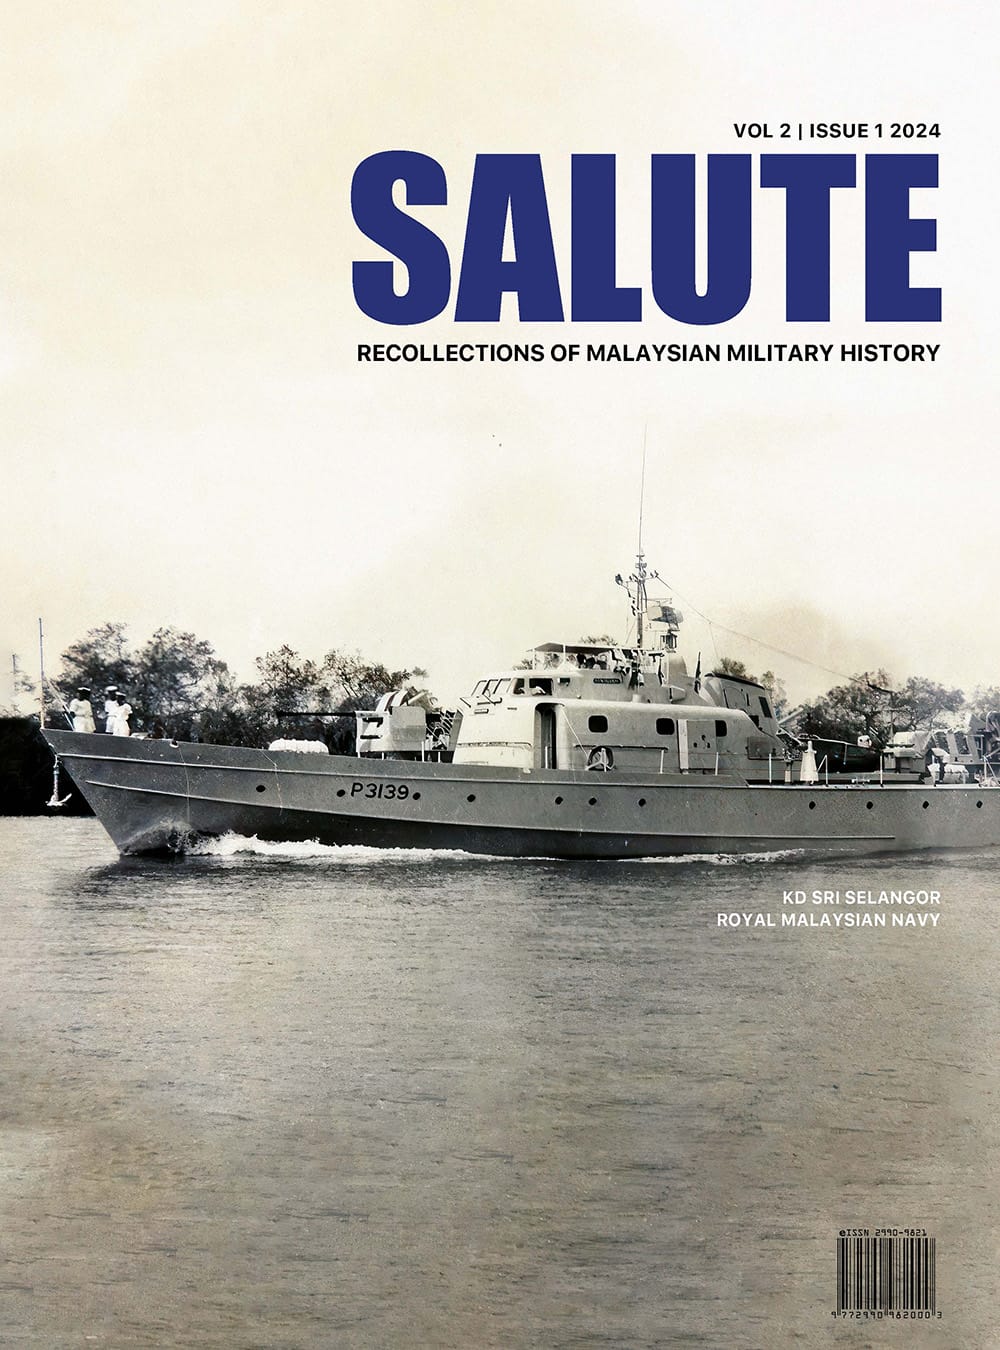 Salute Vol 2 Issue 1 2024 R6_Page_01